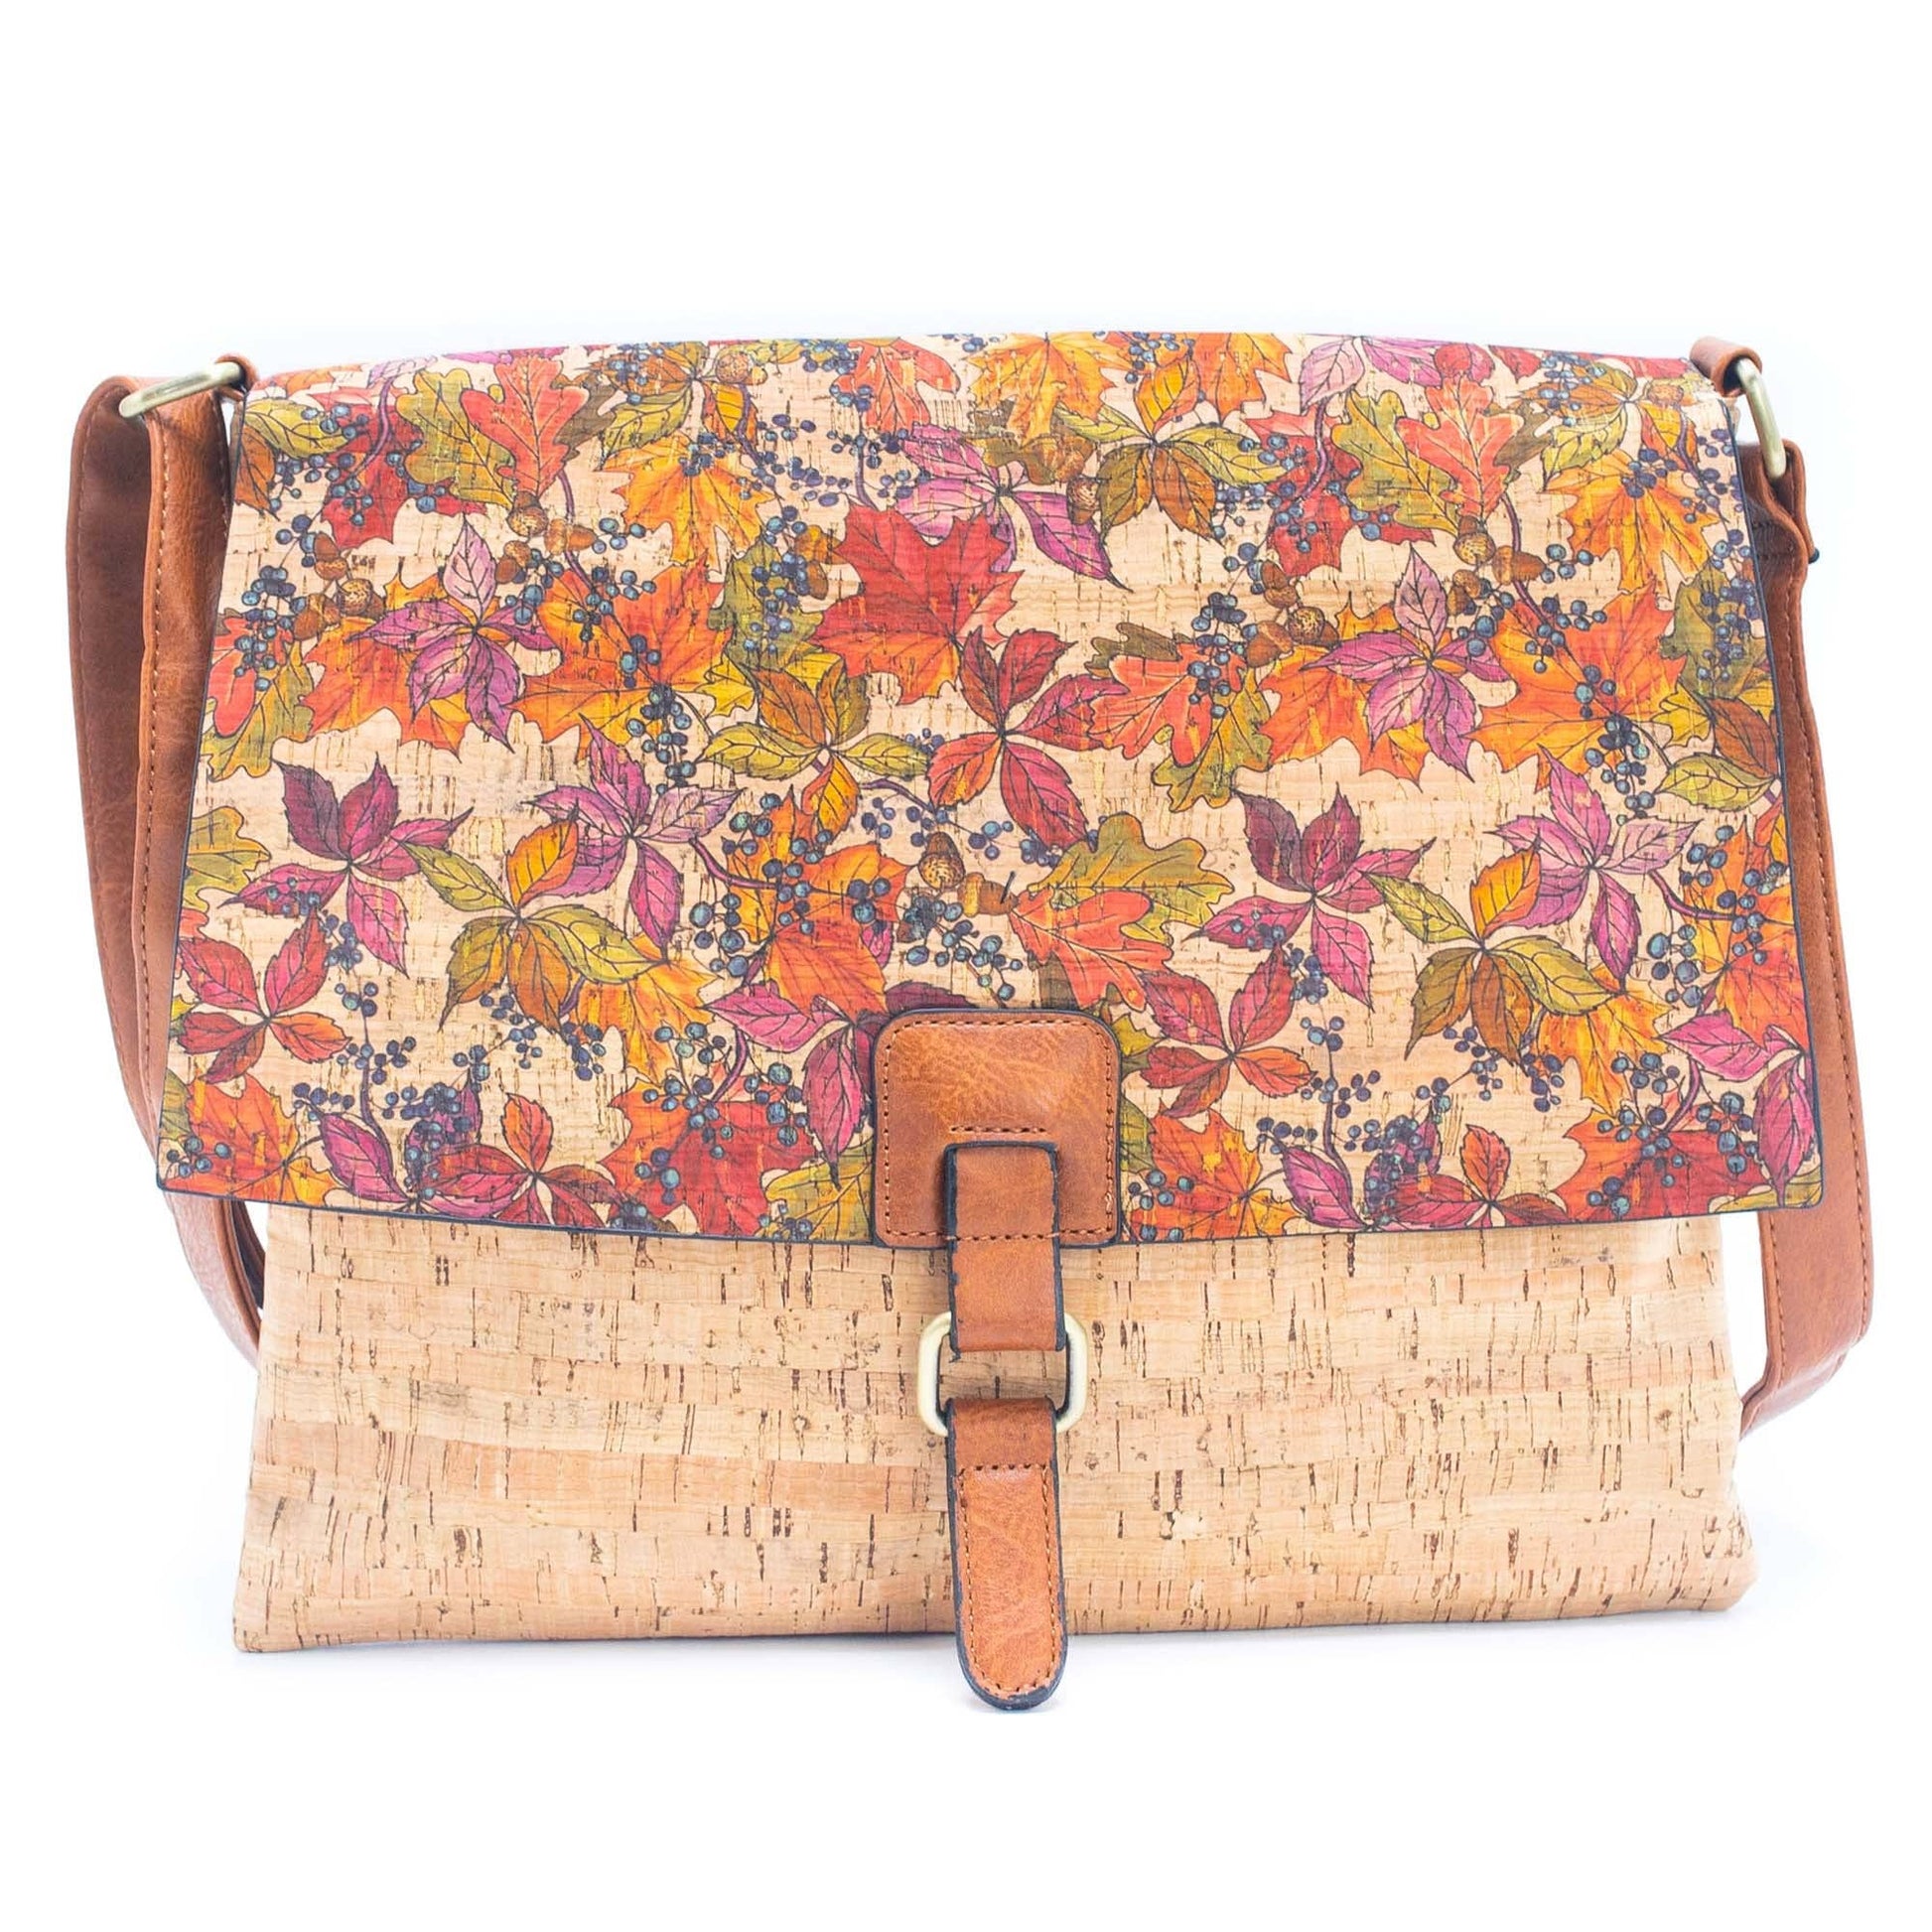 Cork Crossbody Bag with Mosaic and Floral Prints BAGD-464-7